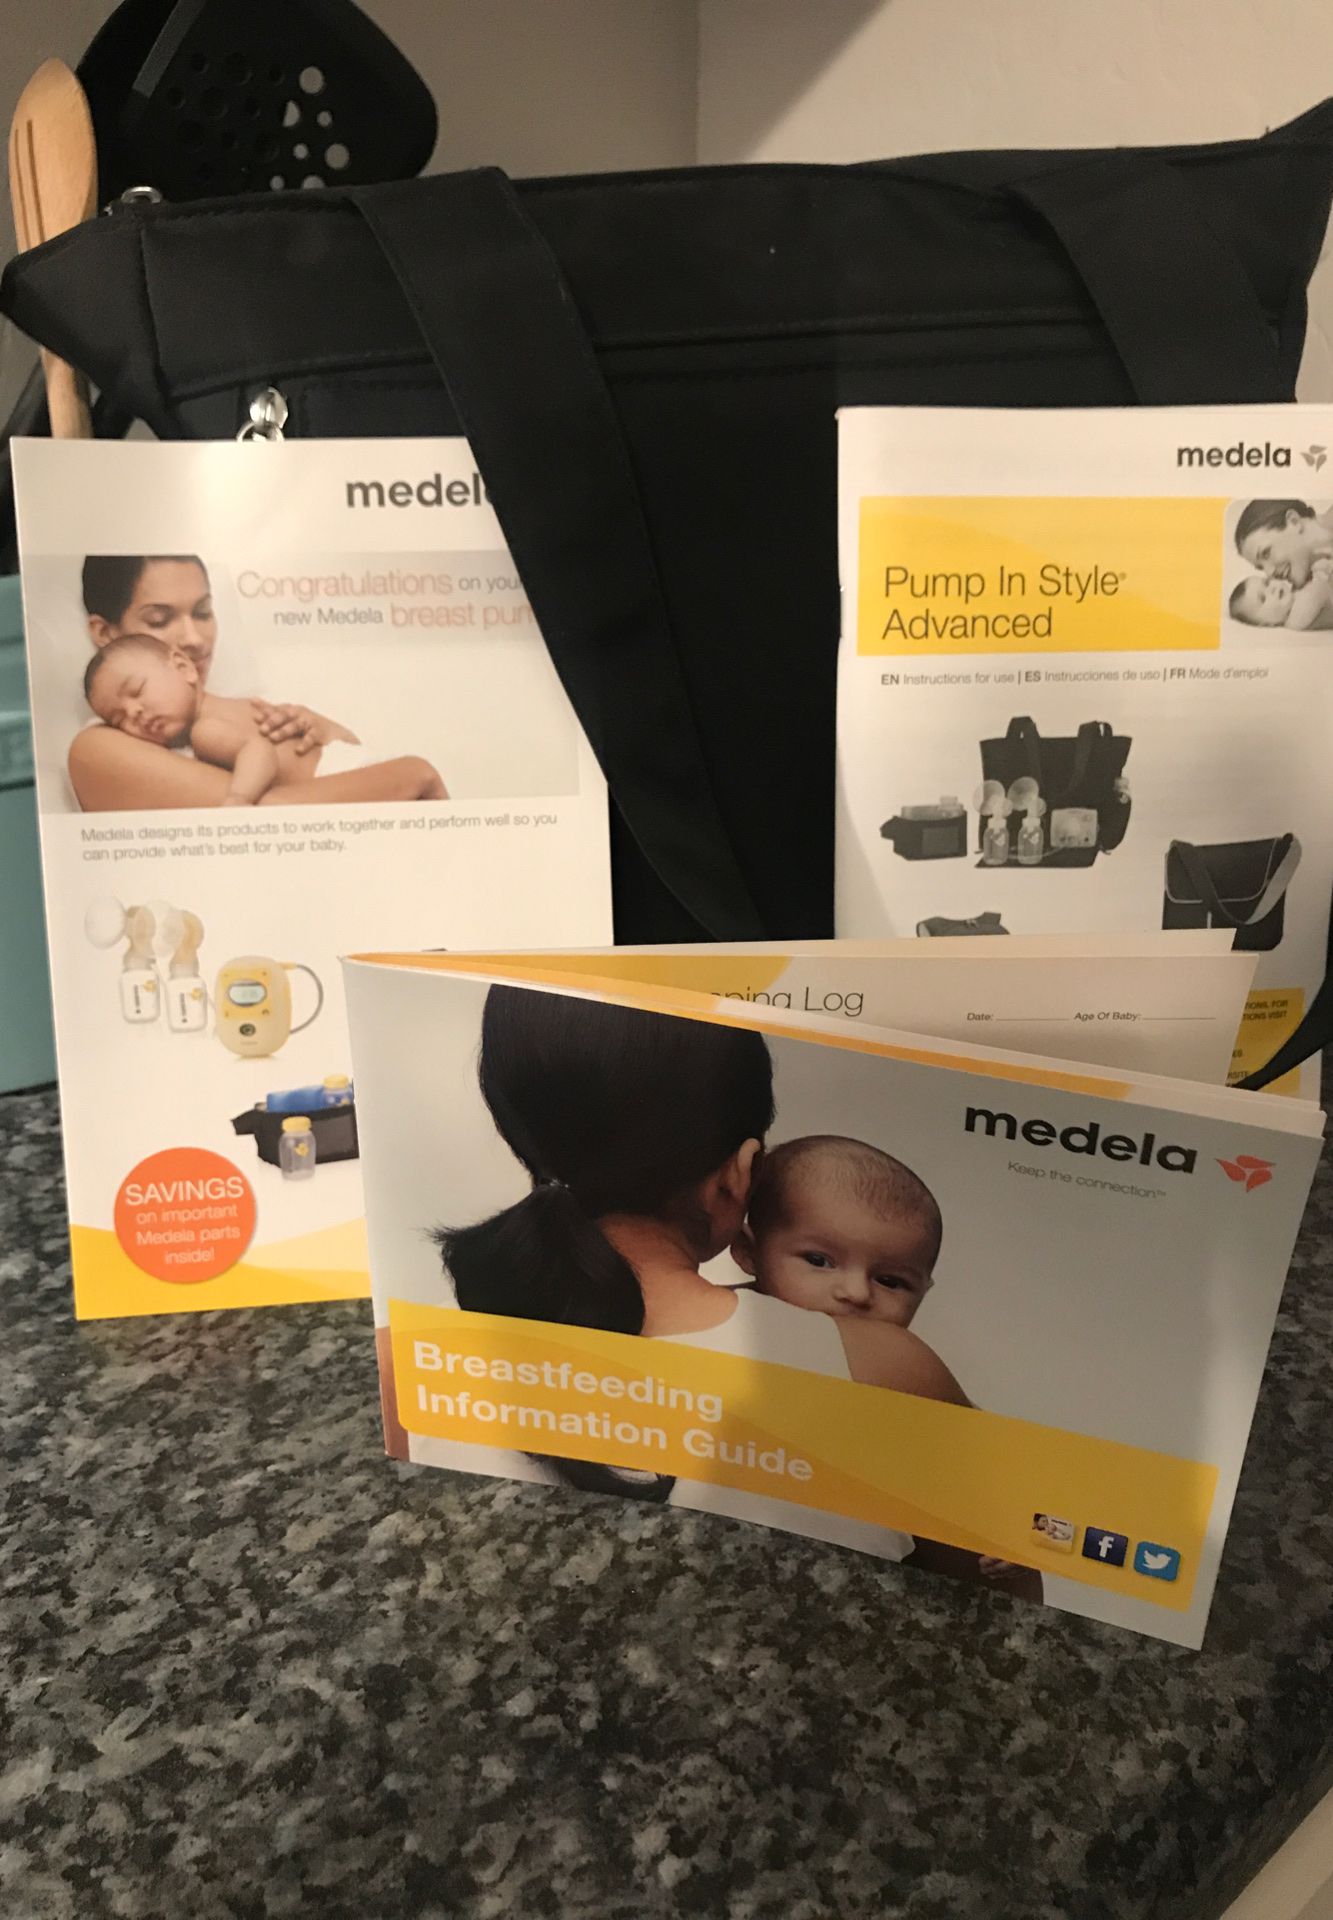 Medela Pump in style Advanced